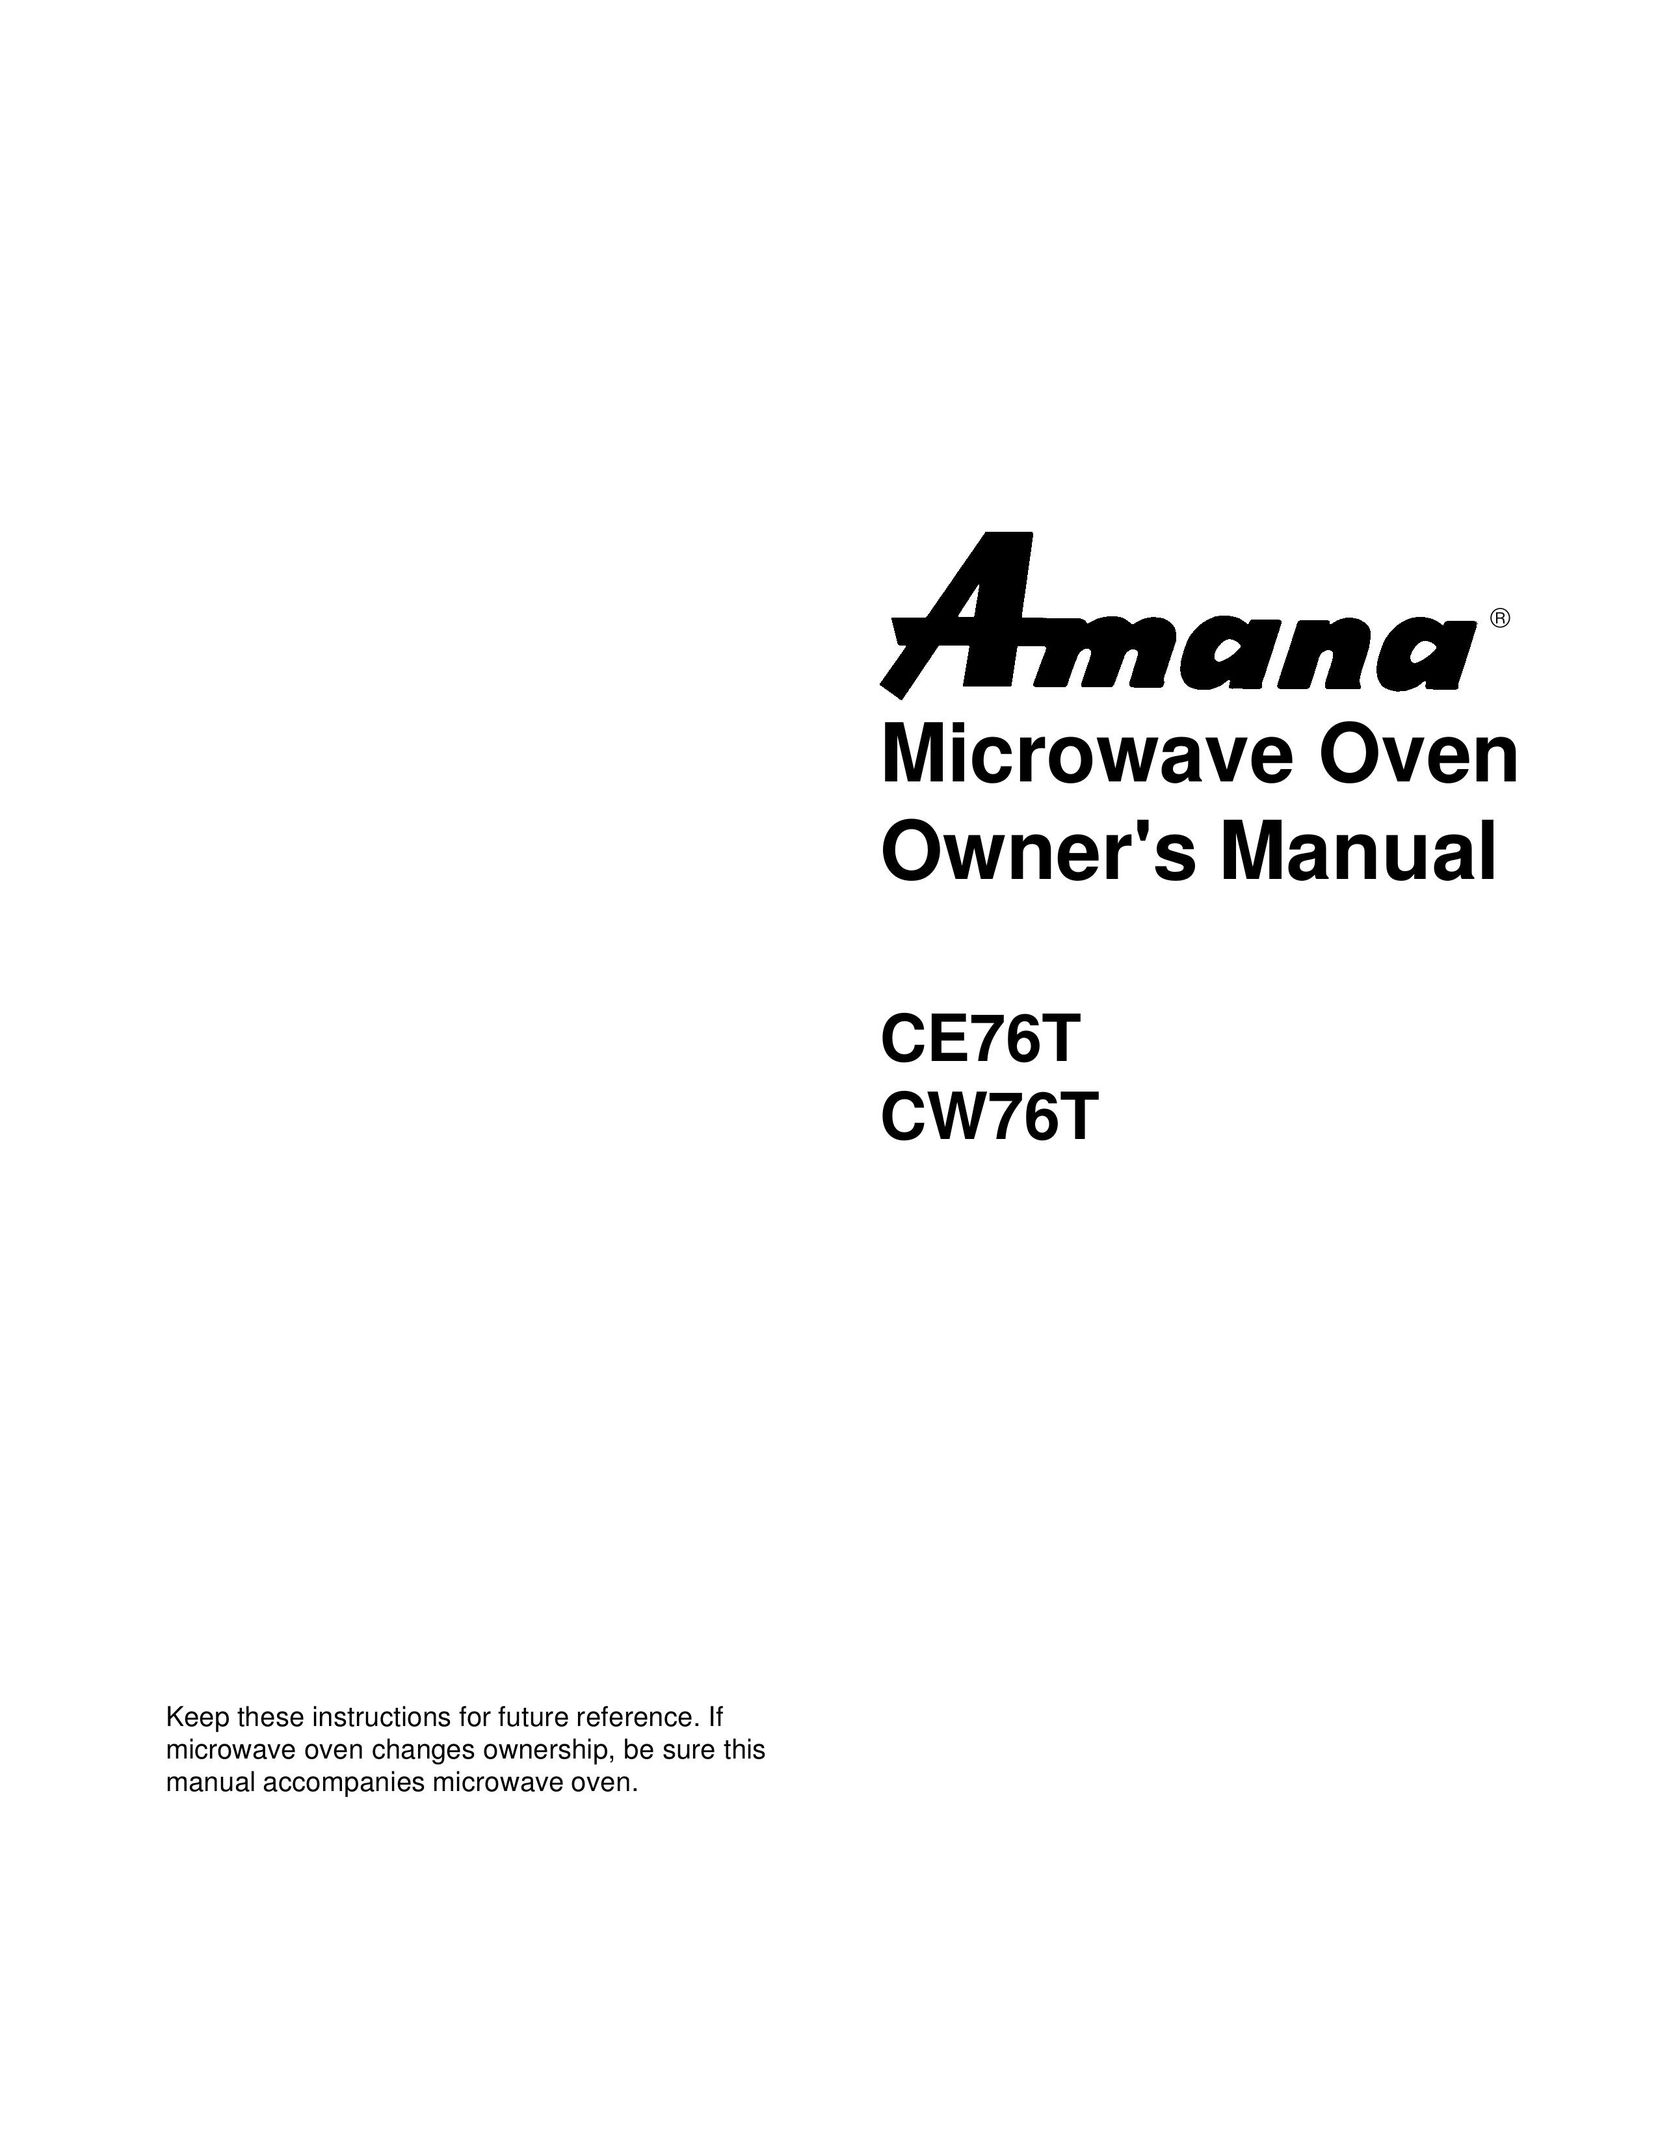 Amana CE76T Microwave Oven User Manual